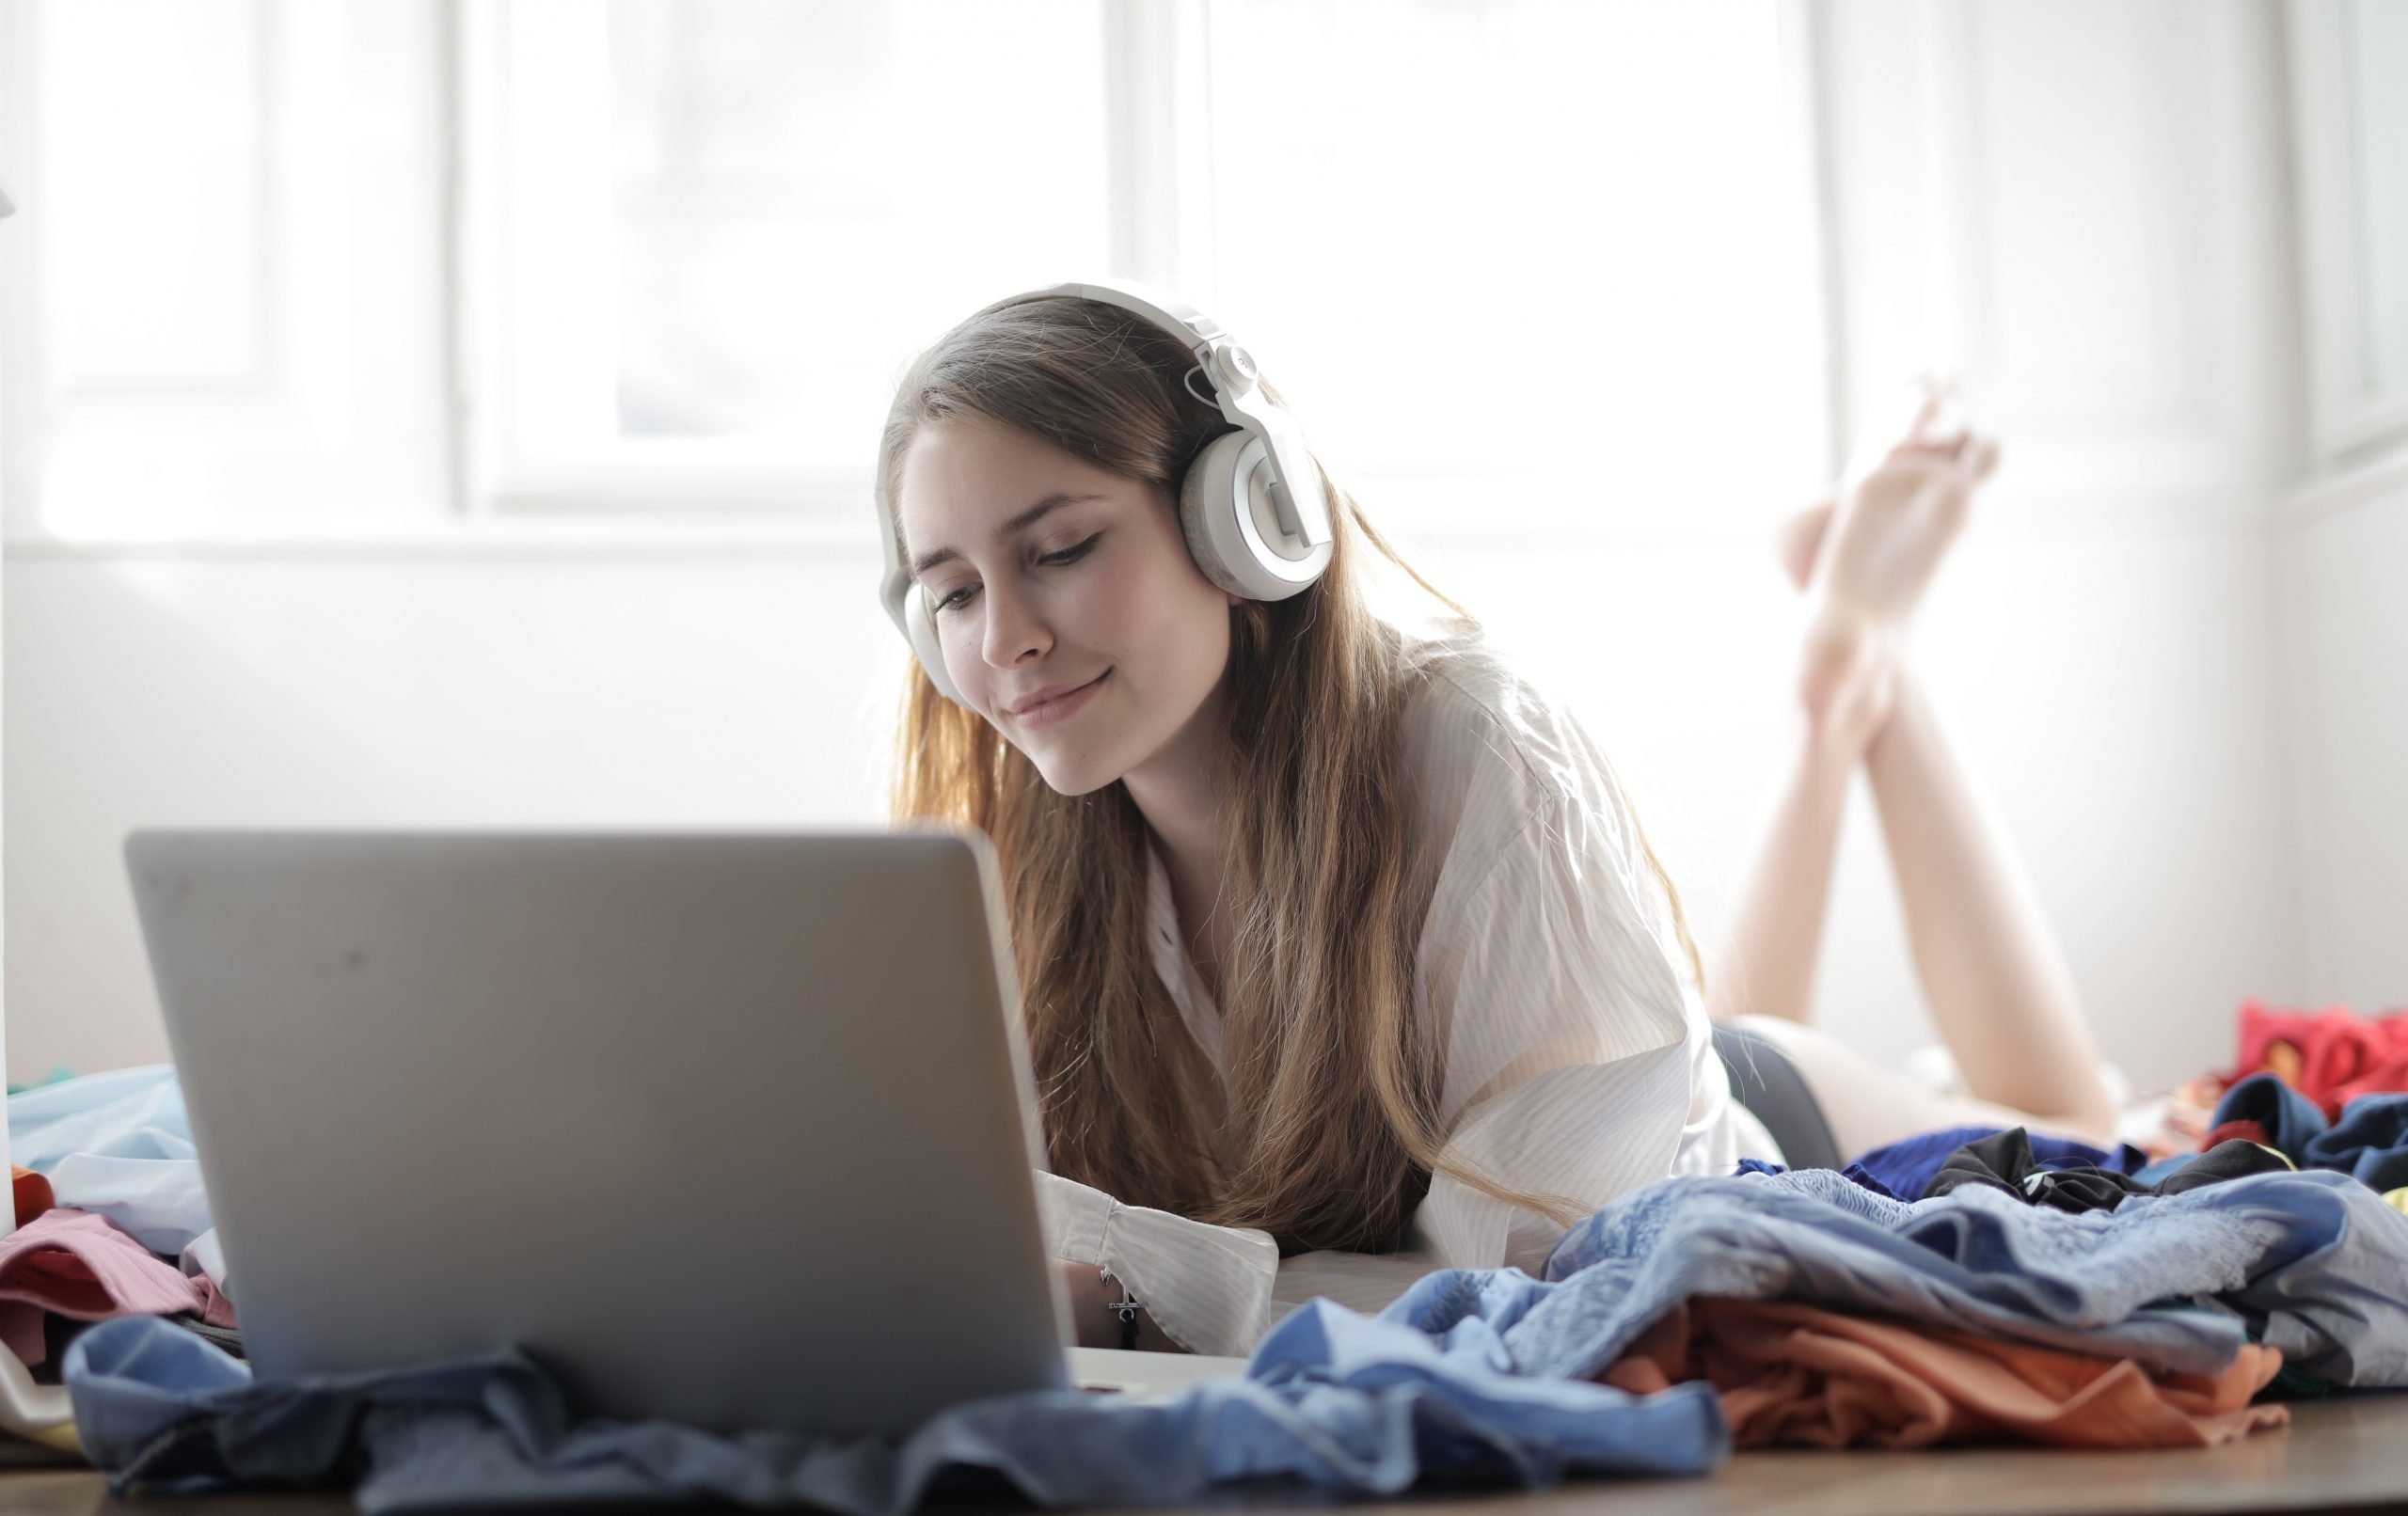 A photo of a woman listening to music on the internet, a common strategy in how to find new music.